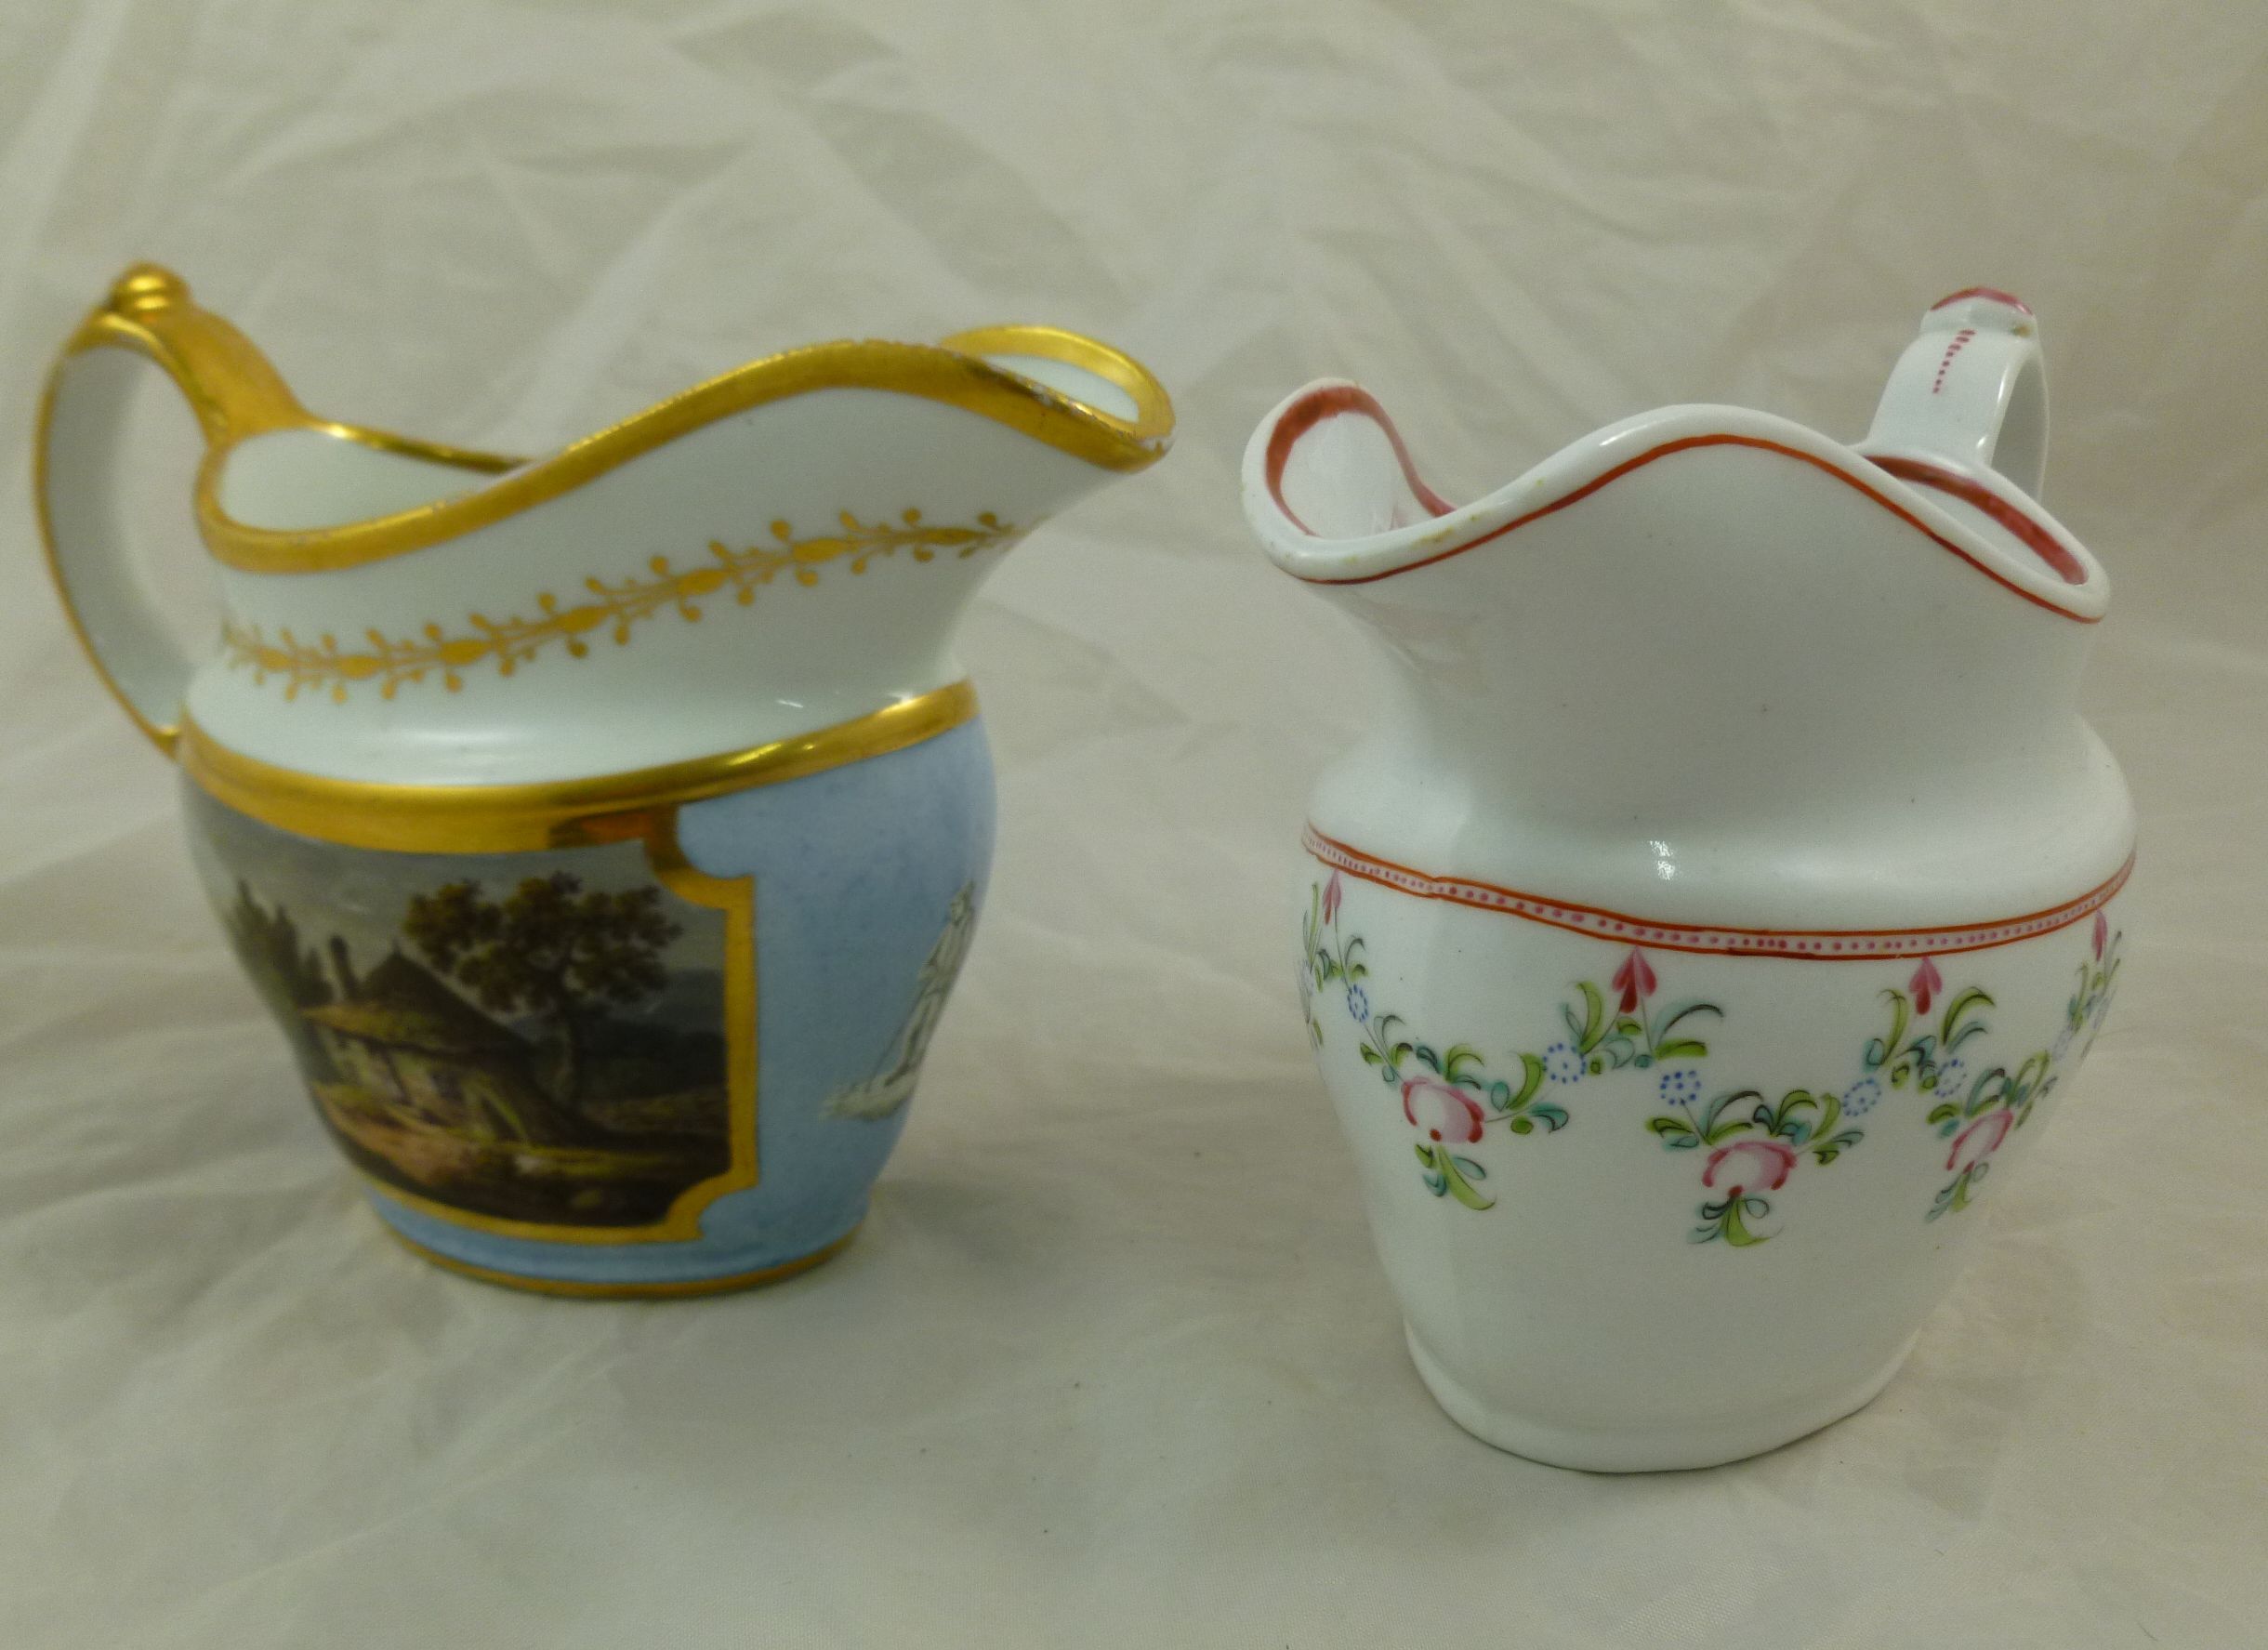 Two late 18th/early 19th century porcelain milk jugs, the first decorated with hand painted rural